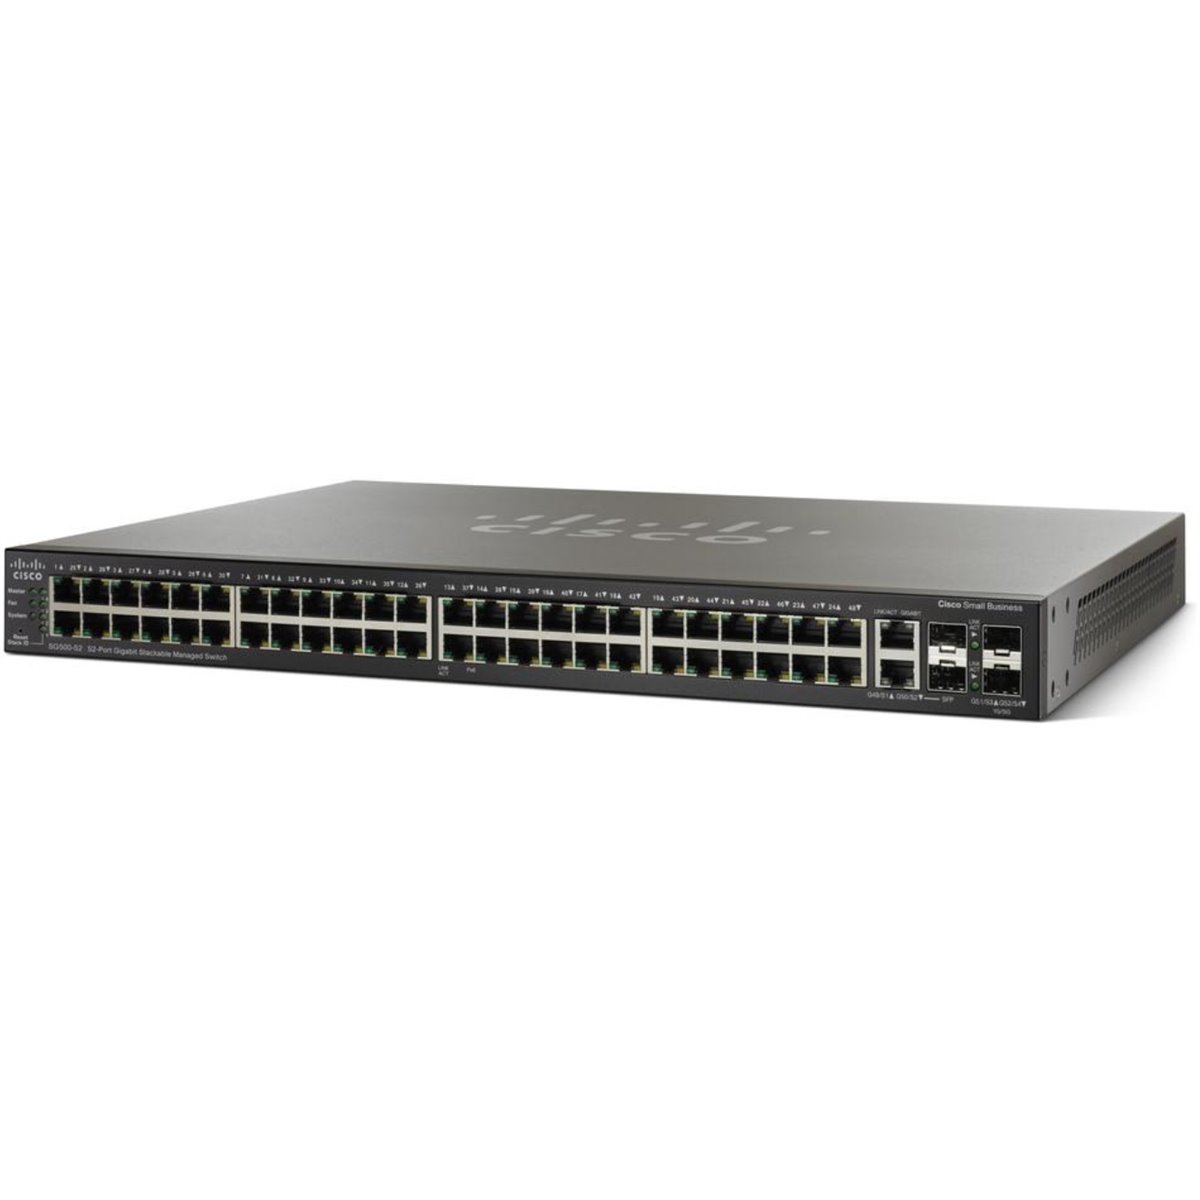 Cisco SG500-52MP-K9 - 48-Port 10/100/1000 Stackable Managed L3 Switch+ 2-port - Switch - 1 Gbps